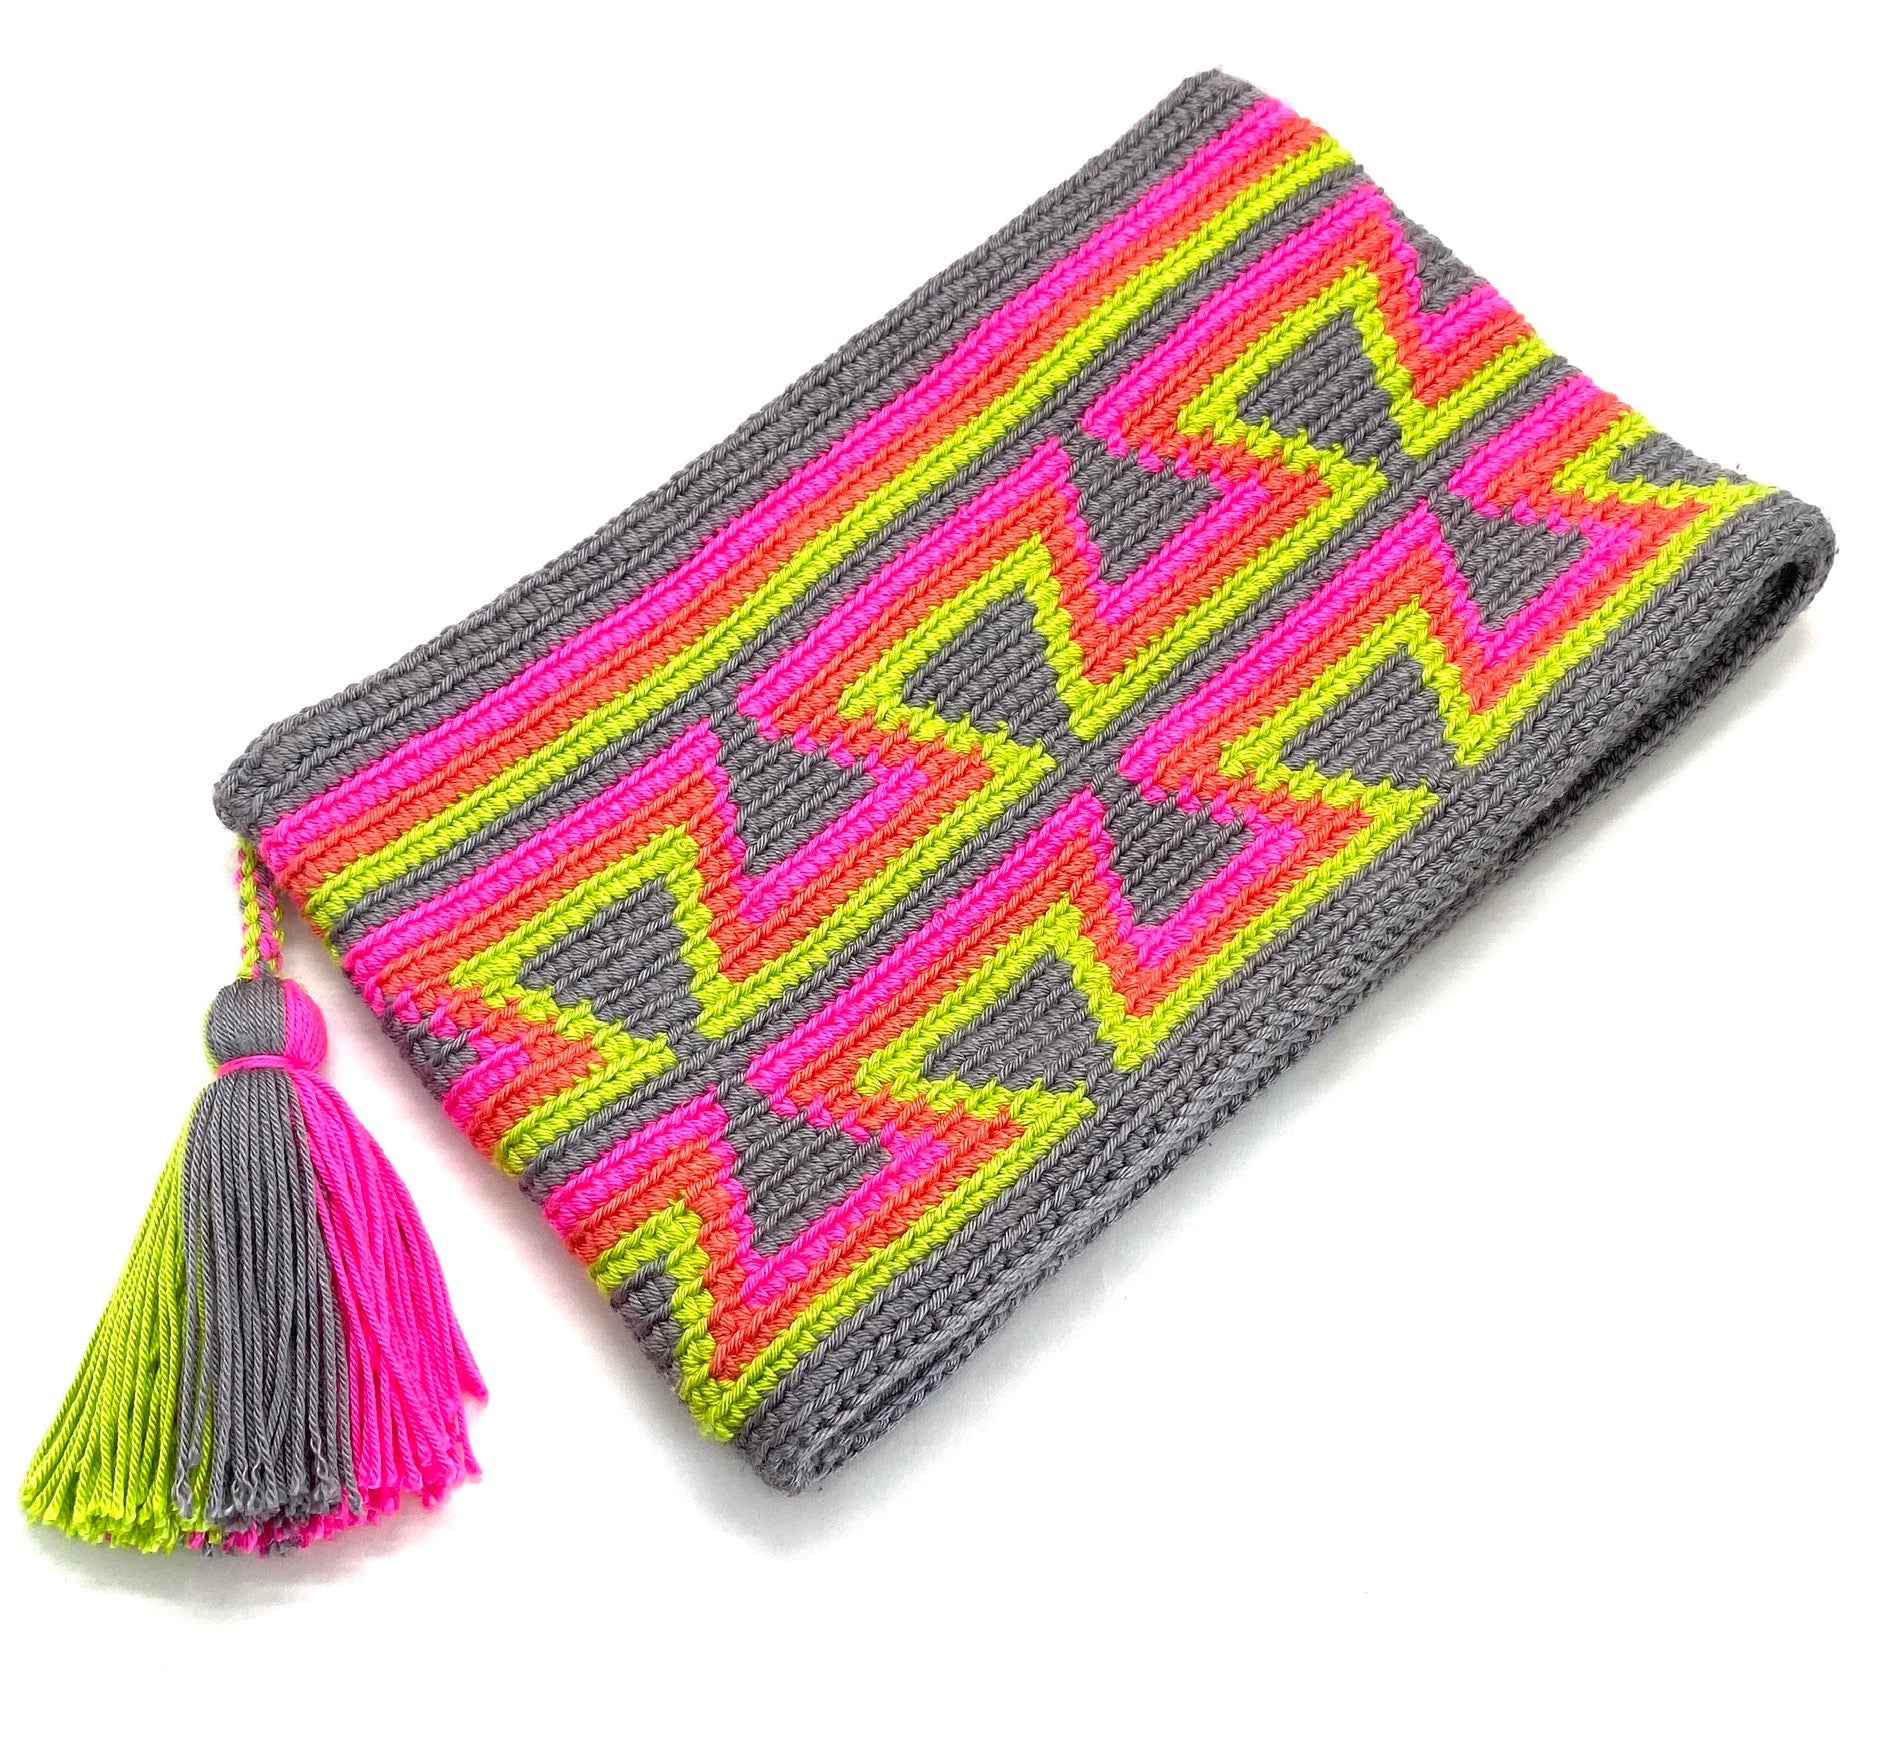 Clutch with grey body, grey inverted triangles, fluo pink, orange, and tassel.